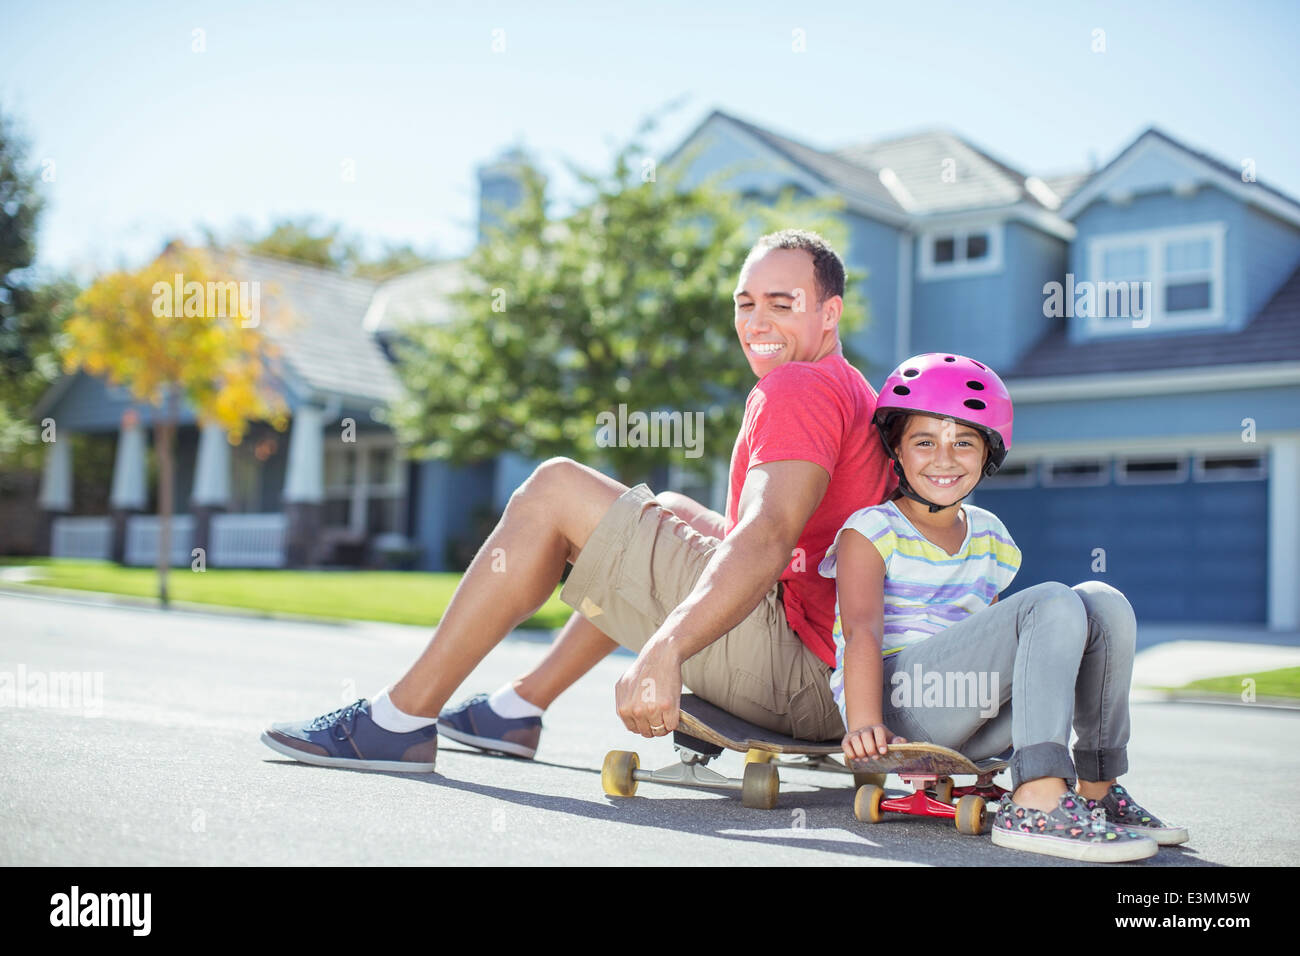 Father and daughter sitting on skateboard Stock Photo